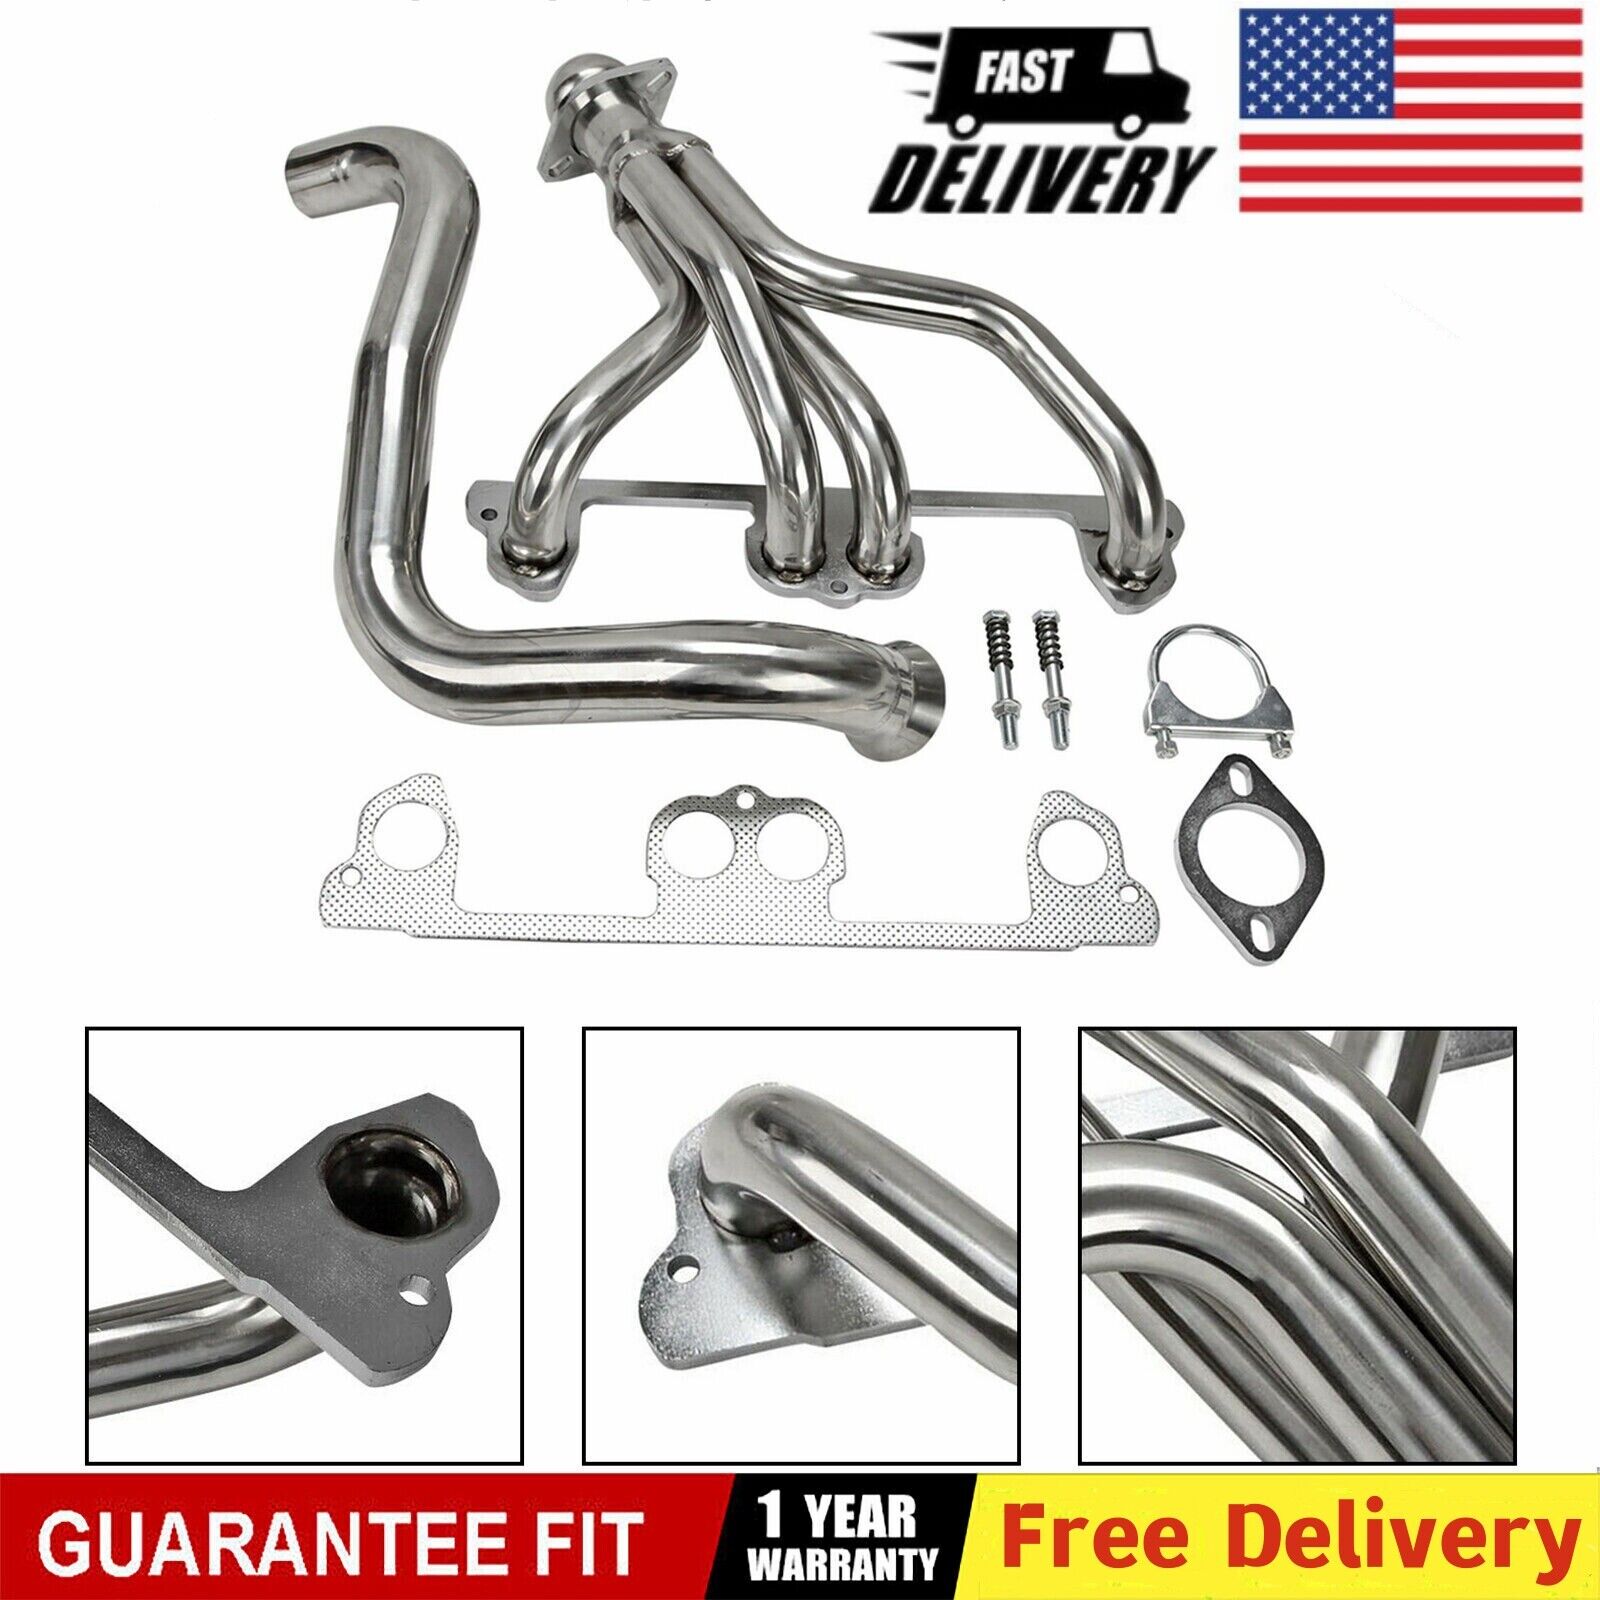 Stainless Steel Exhaust Manifold Header for 1997-1999 Jeep Wrangler TJ 2.5L L4